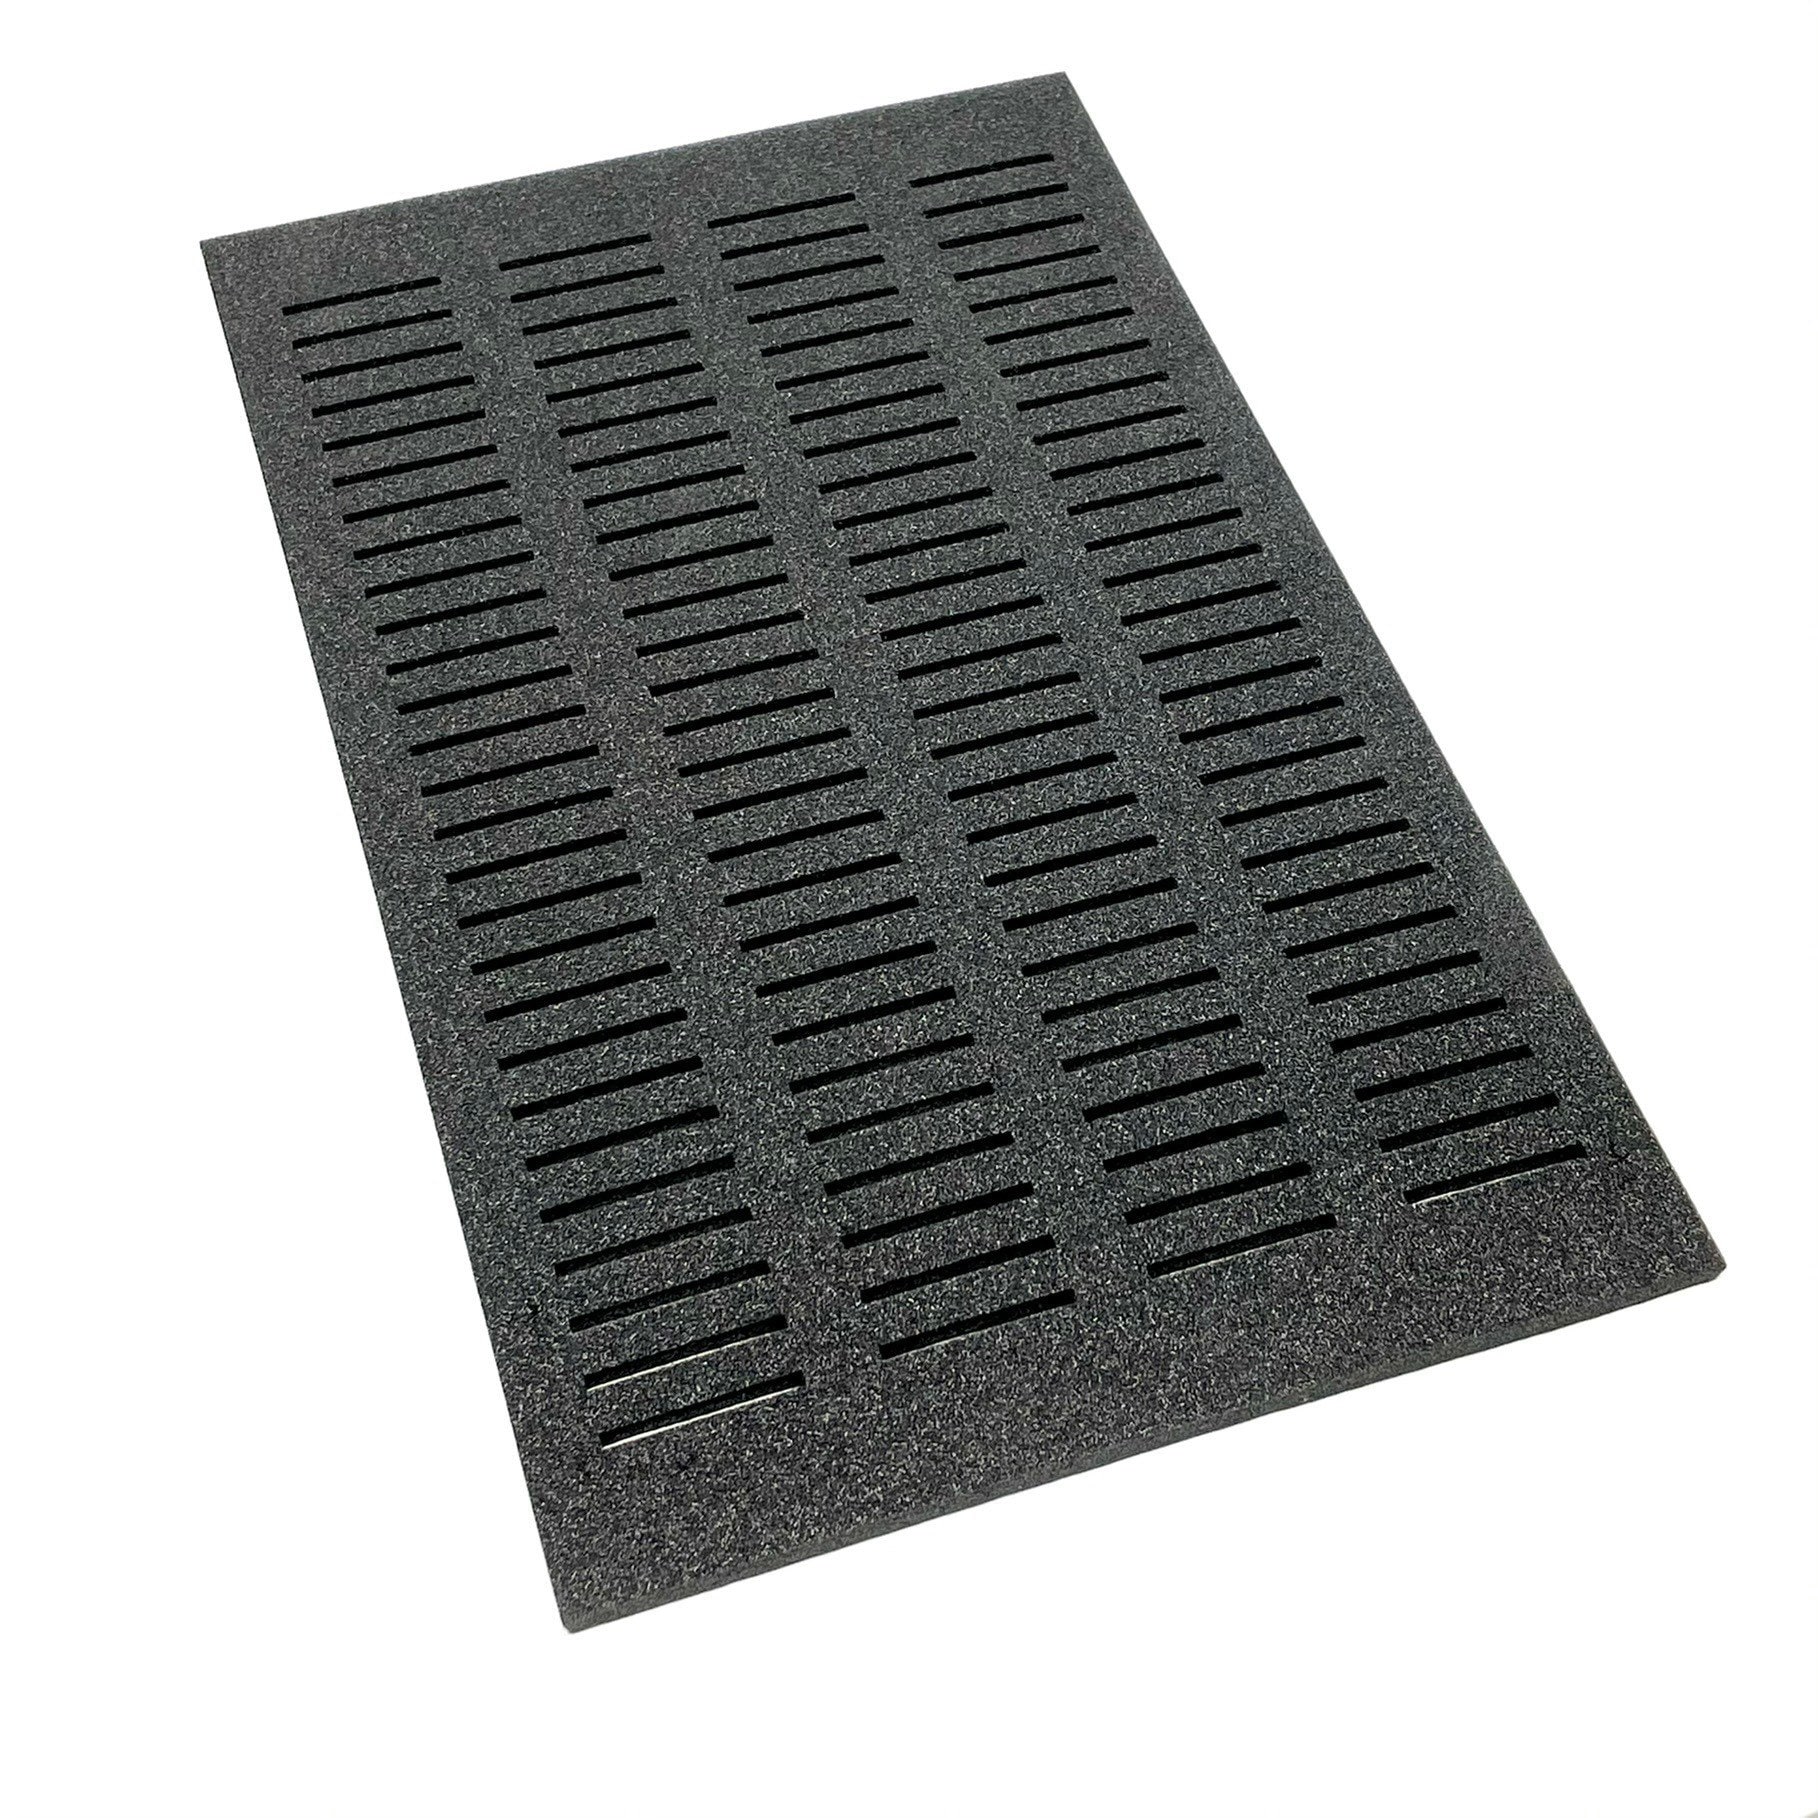 Oil Stopper Rubber Mat with Disposable Inserts